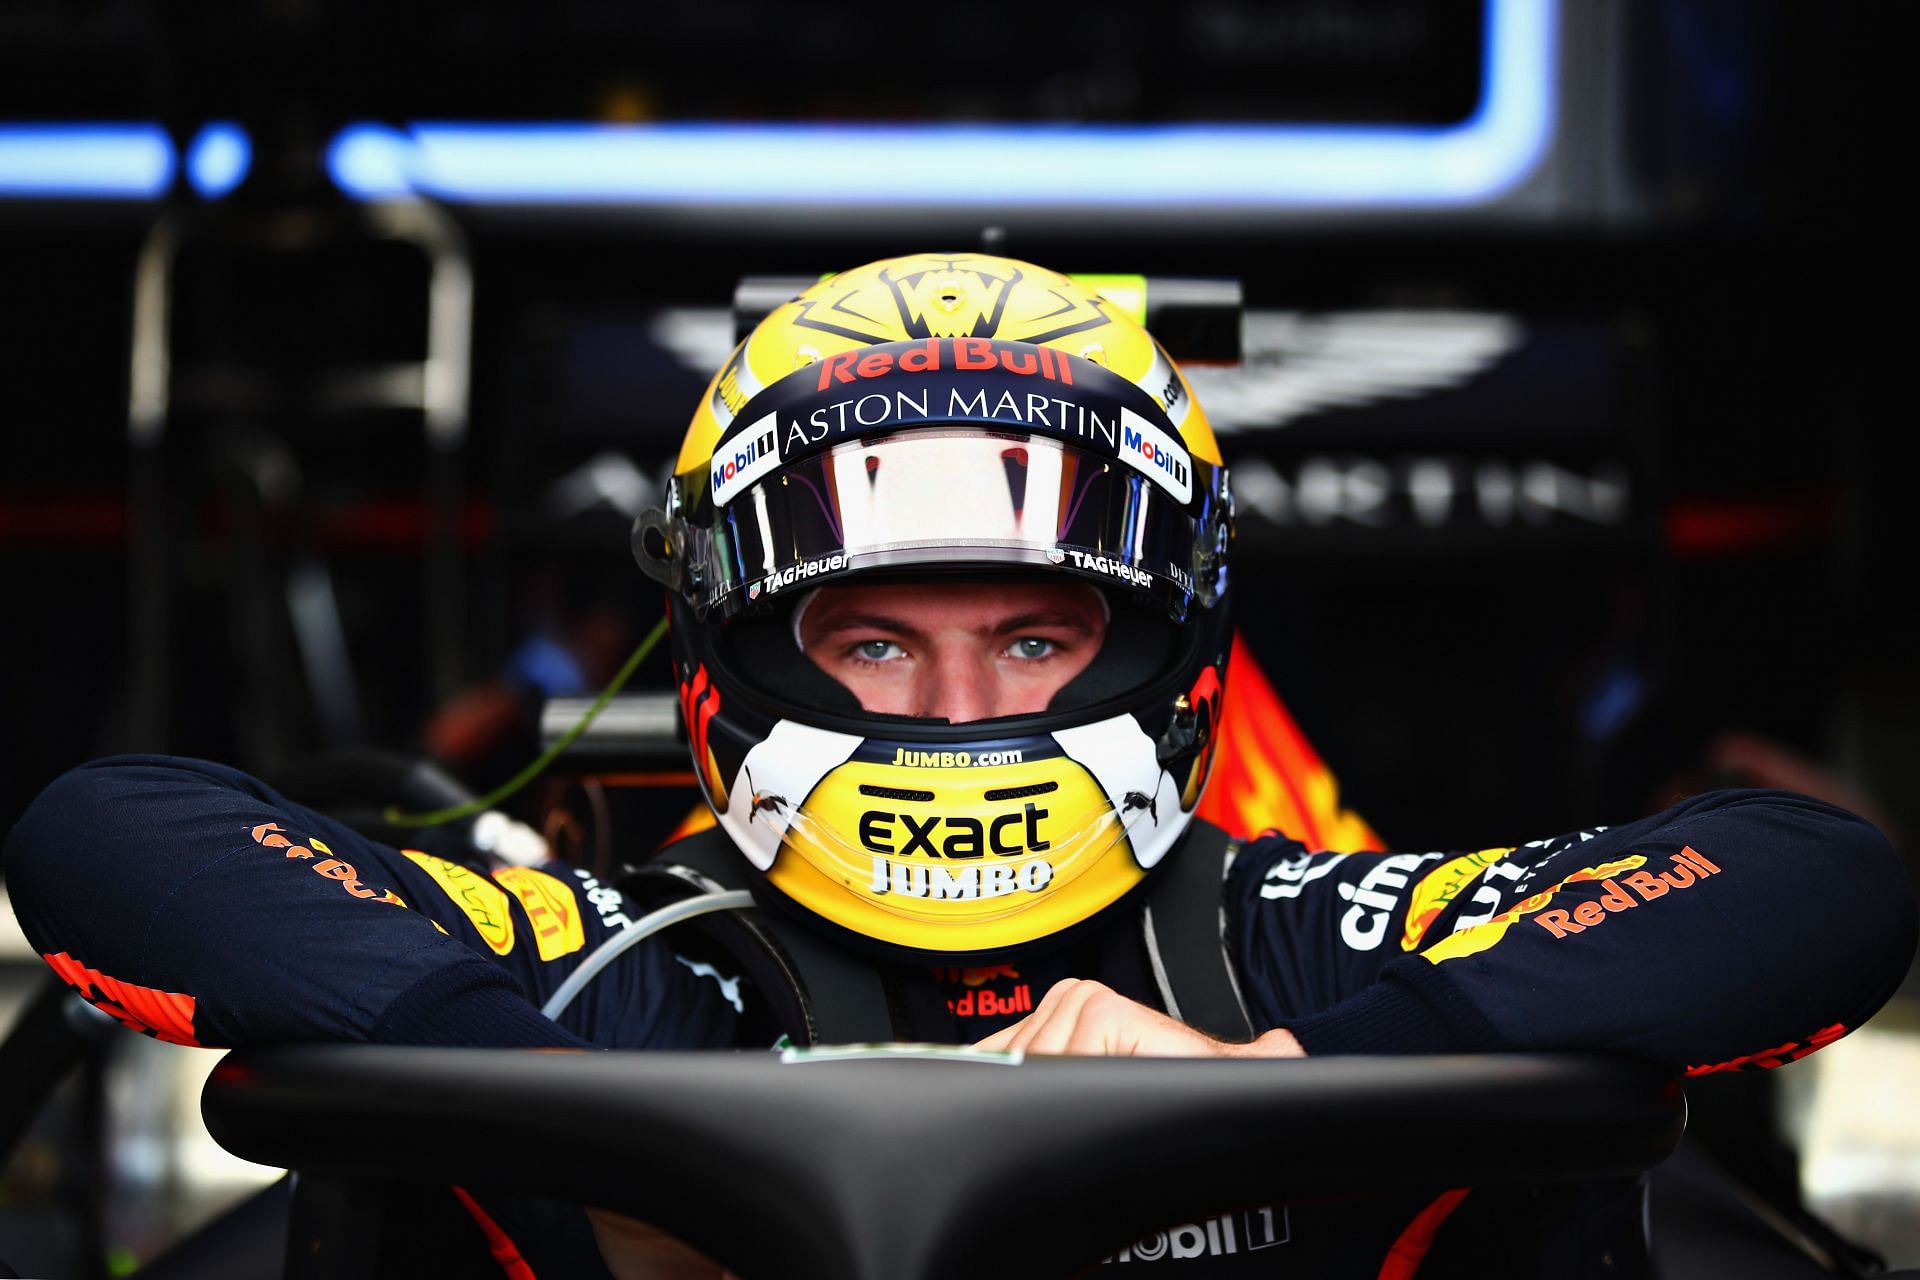 Max Verstappen will be the first F1 world champion in seven years to use the #1 after Sebastian Vettel last used it in 2014